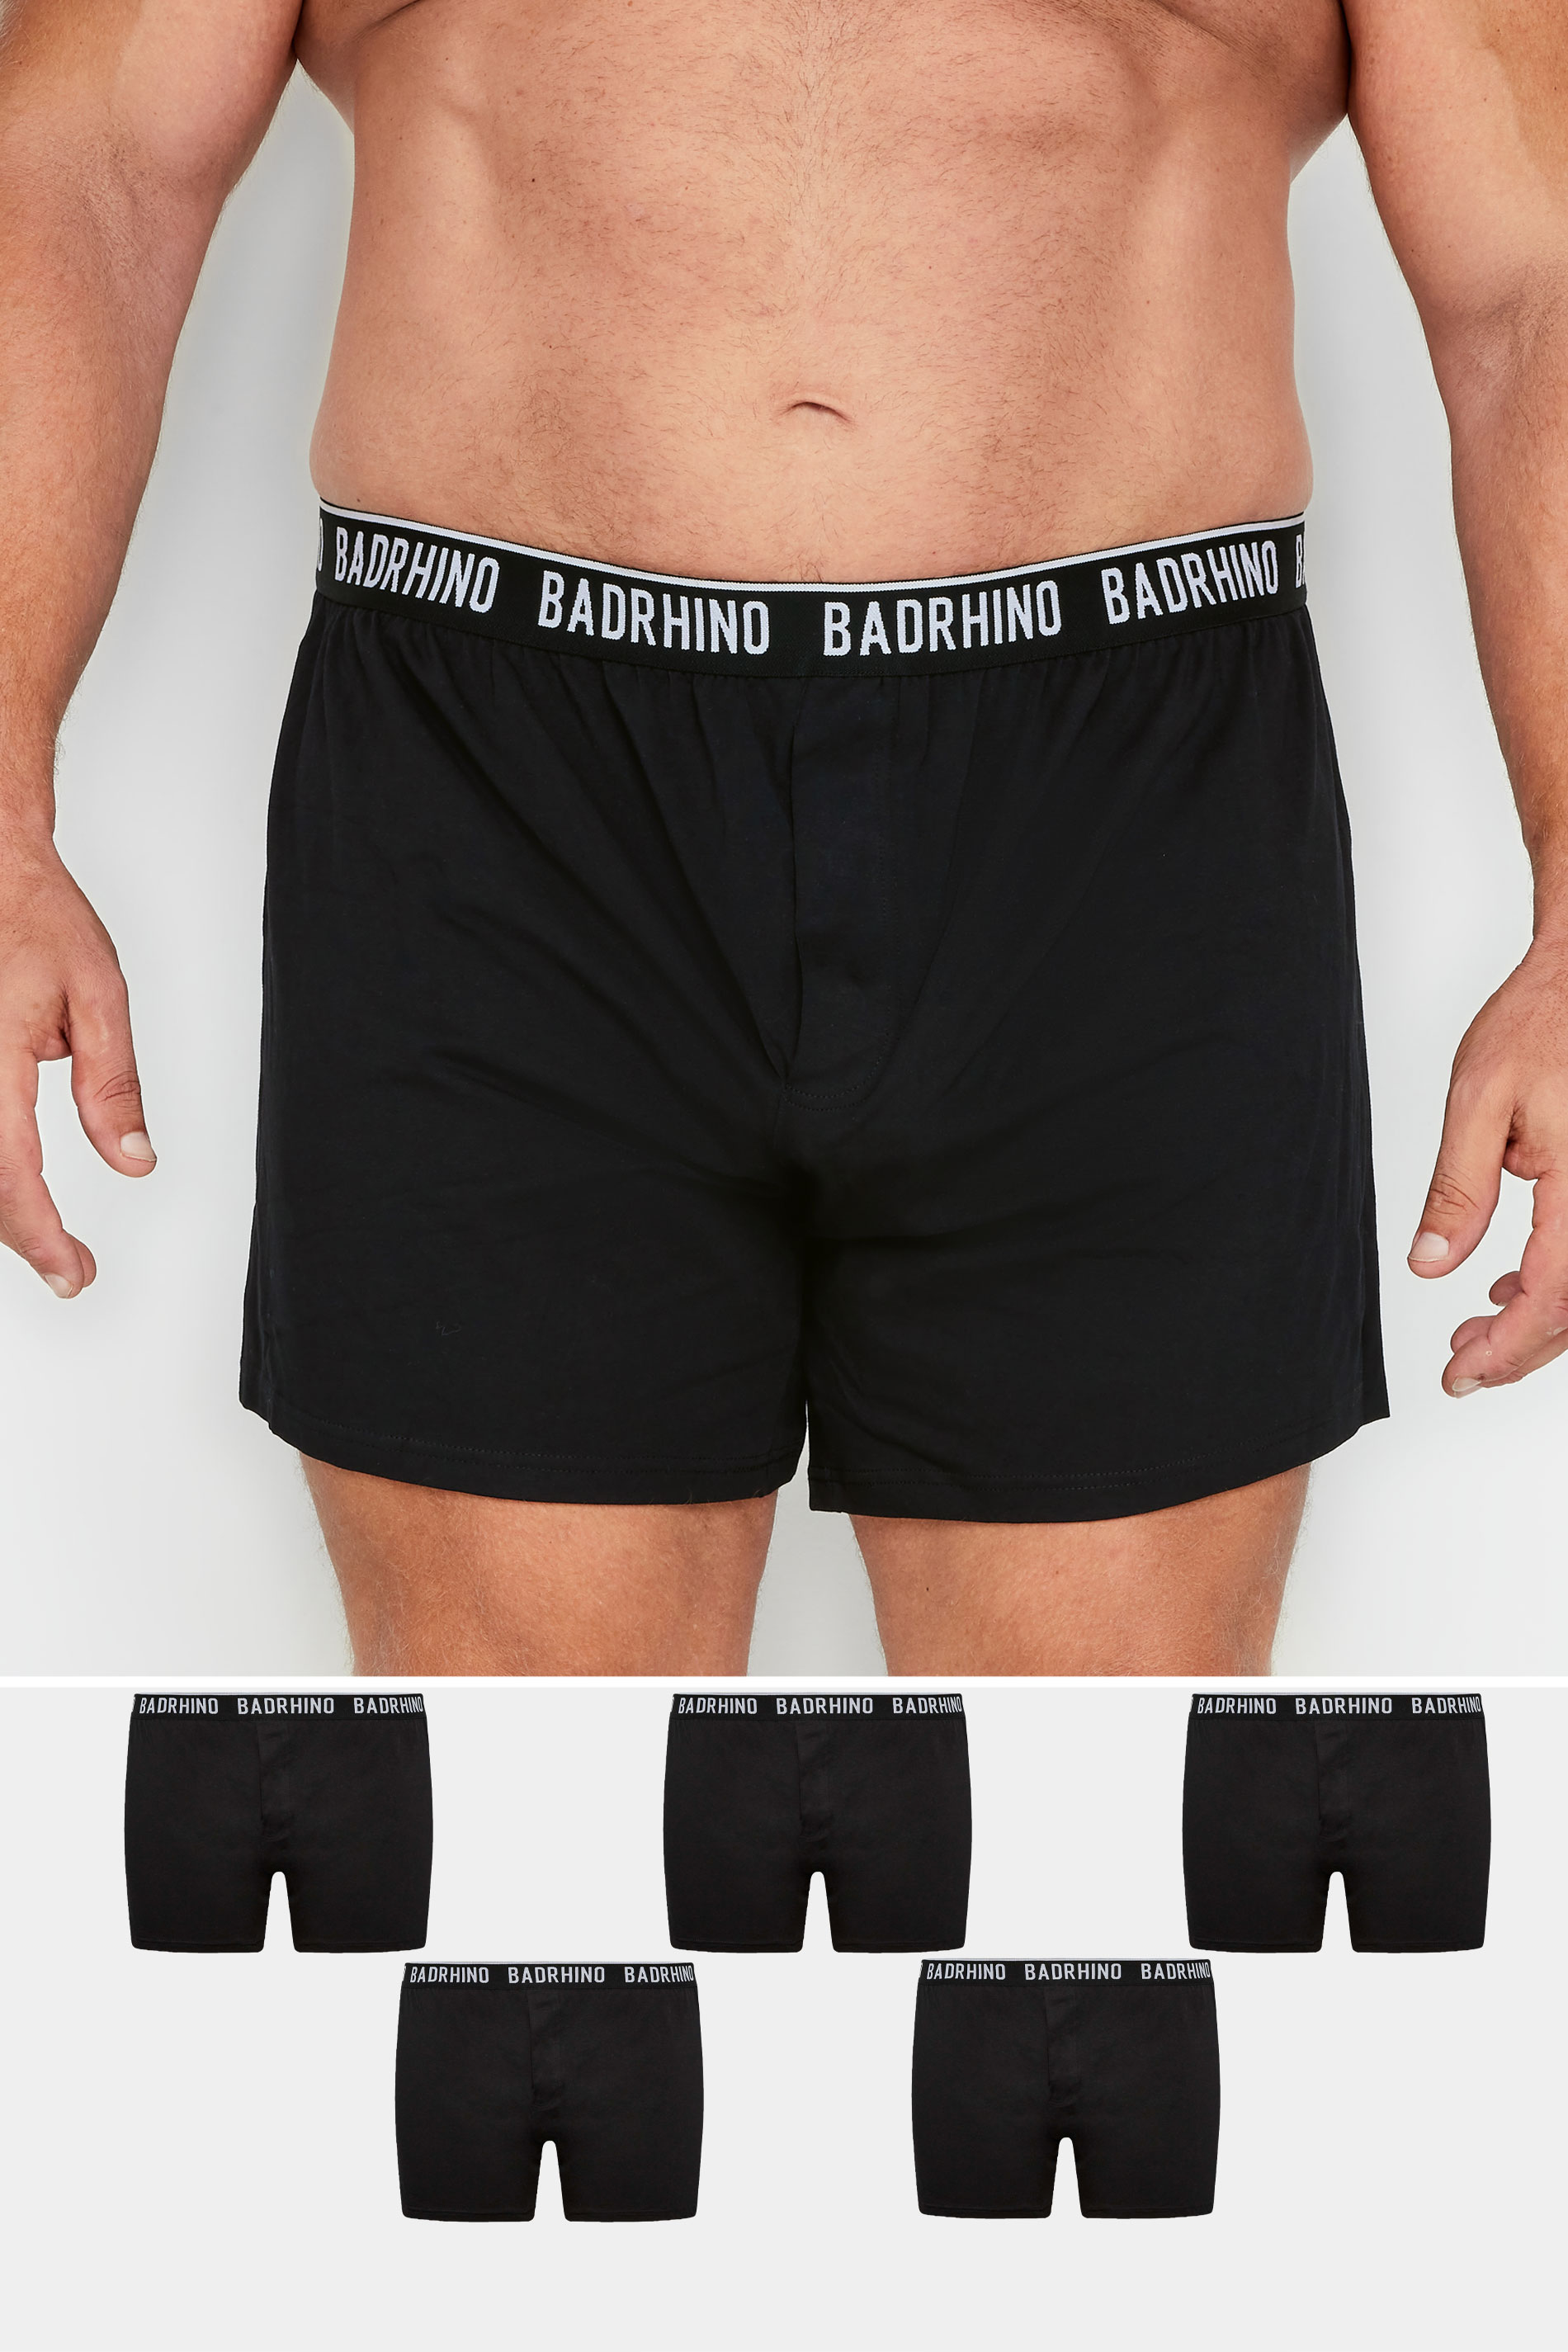 BadRhino Big & Tall 5 PACK Black Button Up Loose Fit Boxers | BadRhino 1